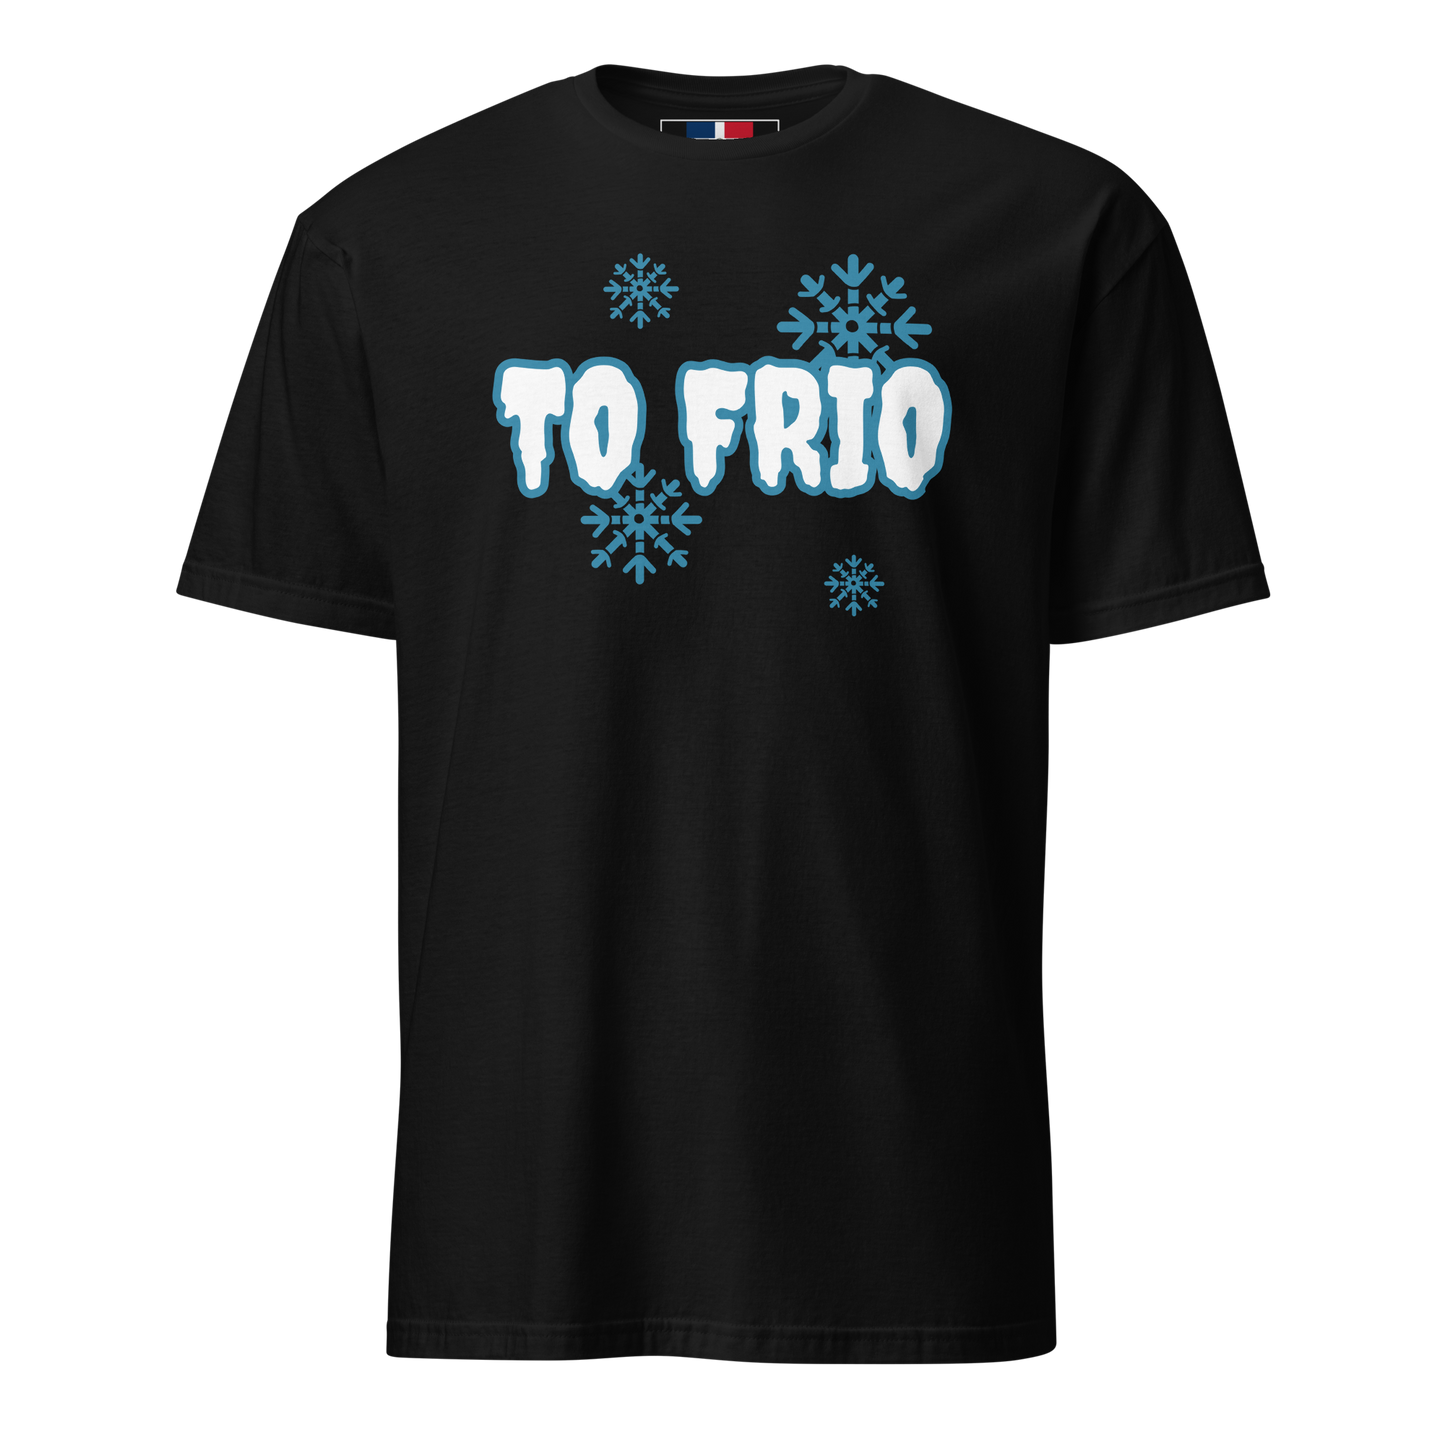 To Frio Short-Sleeve Unisex Dominican T-Shirt